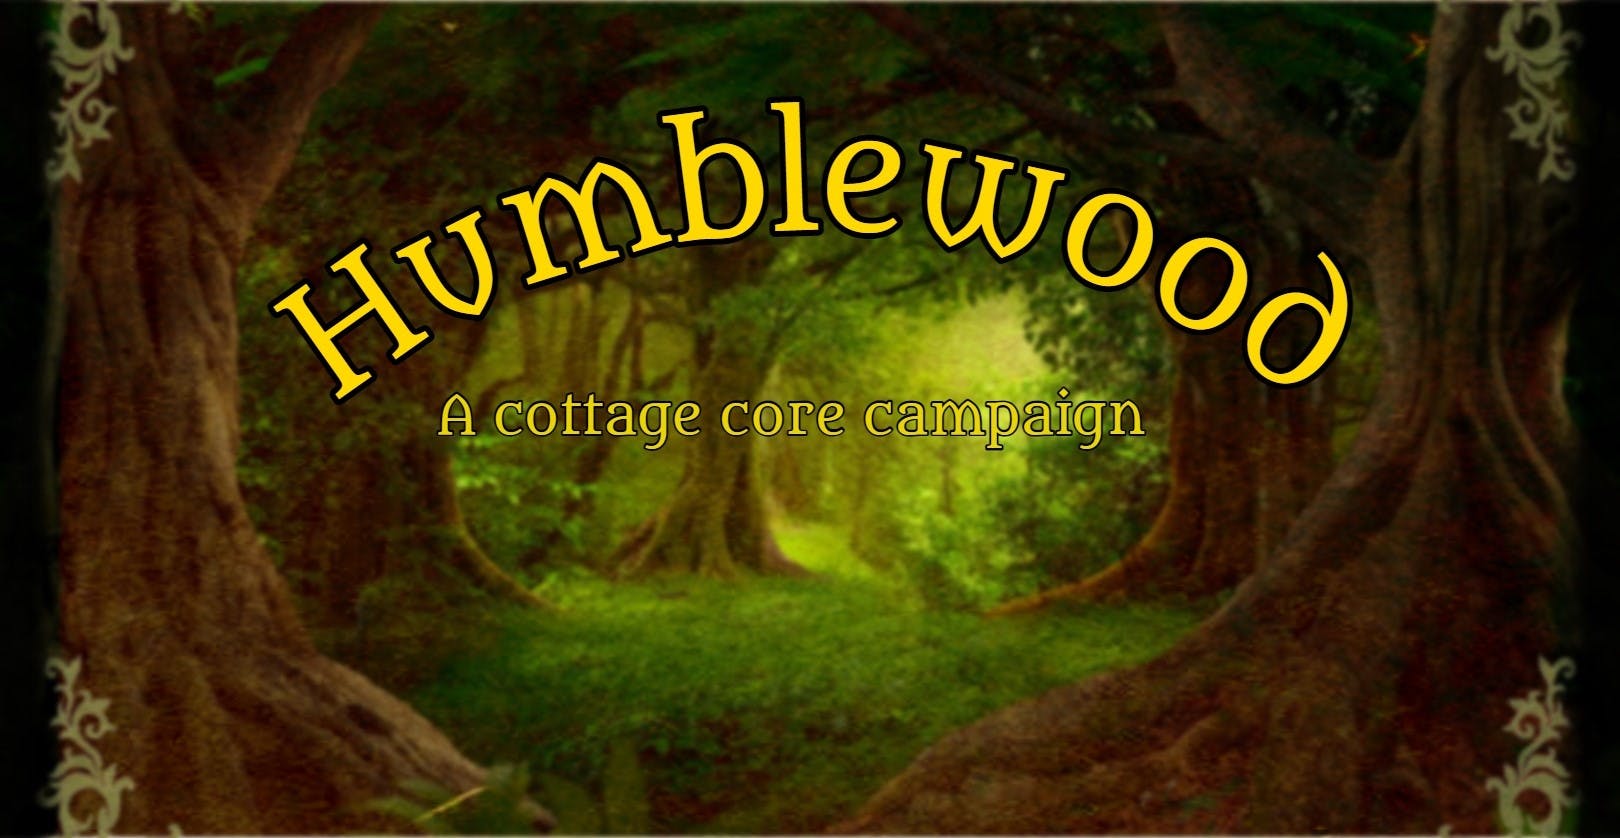 Humblewood | Play new woodland races and save the wood from a fiery fate | (Thursday evenings) | Beginner friendly